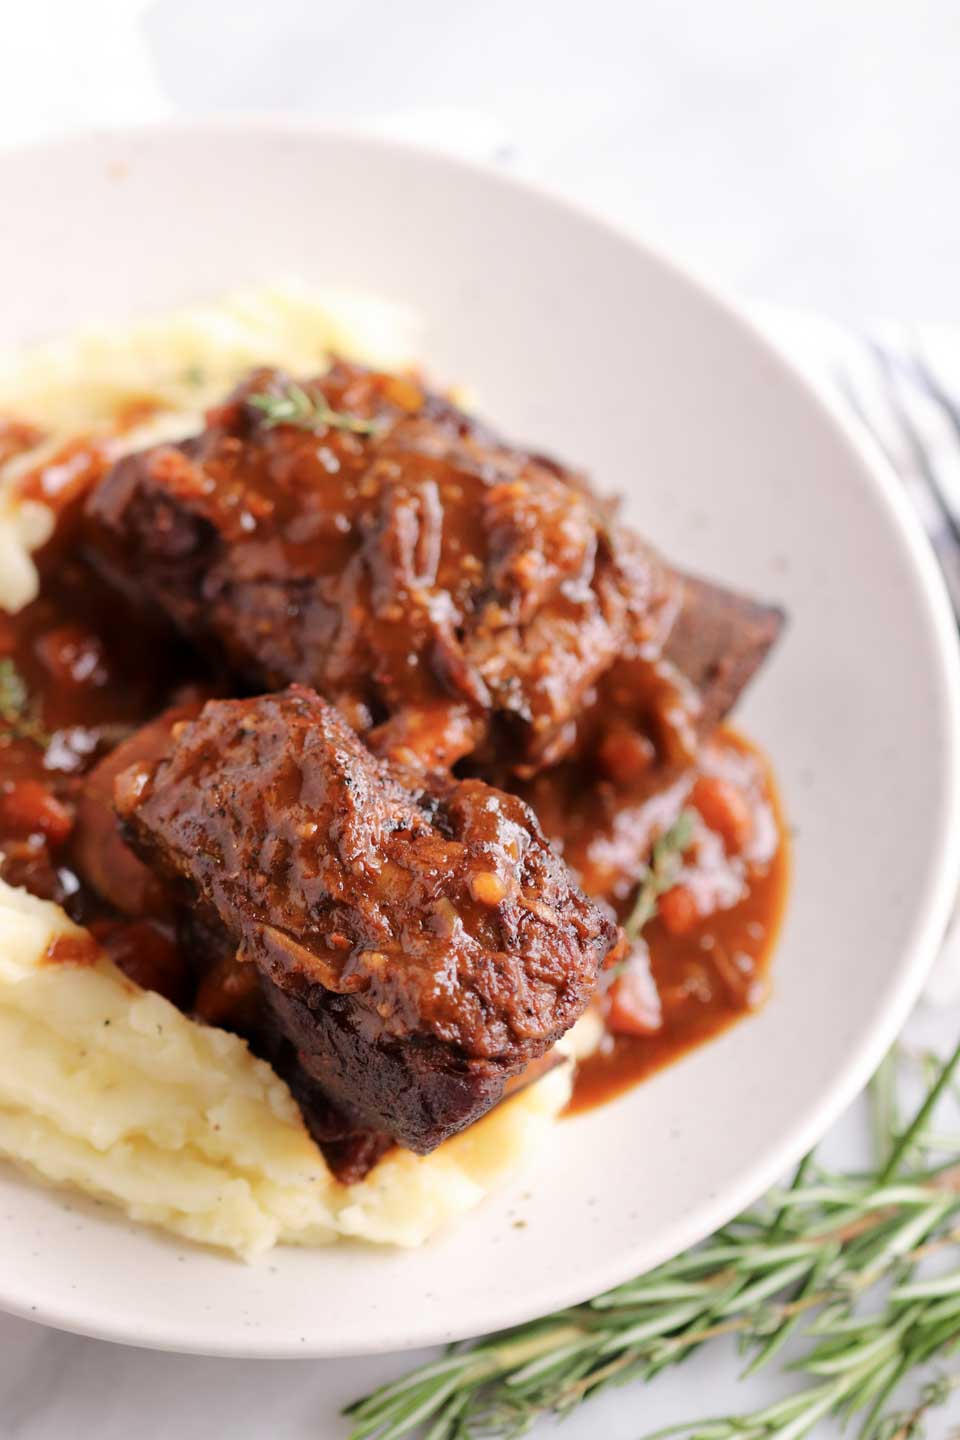 upclose image of slow cooked ribs in a bowl with mashed potatoes